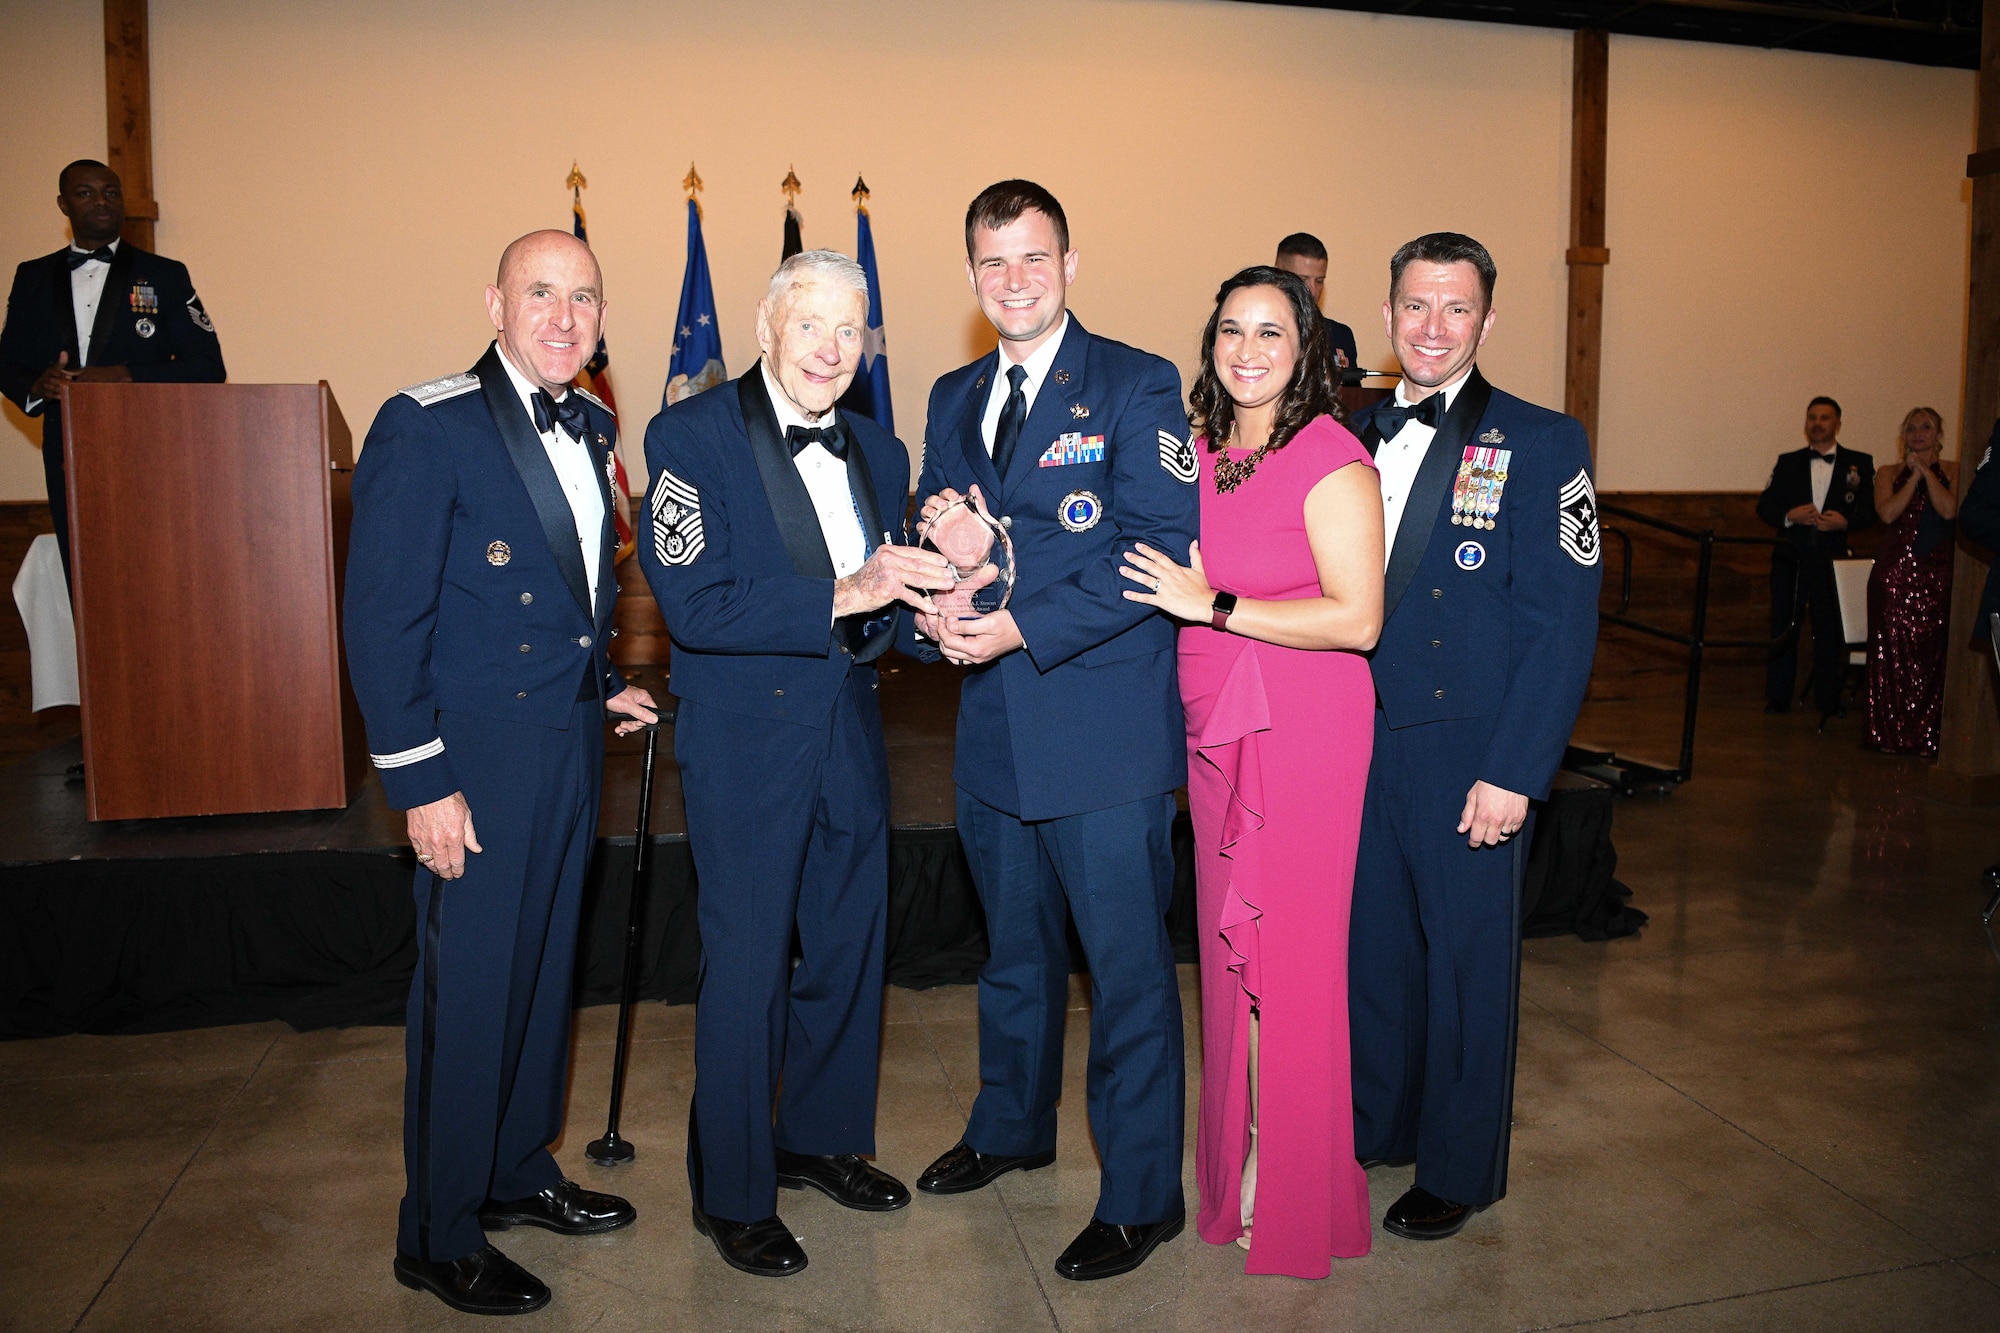 Retired Chief Master Sergeant of the Air Force Robert Gaylor (second from left), the keynote speaker for a banquet honoring Air Force Recruiting Service Operation Blue Suit winners presents AFRS’s fiscal 2021, Major General A.J. Stewart Top Recruiter award to Tech. Sgt. Dustin Kincaid (center), a recruiter from the 336th Recruiting Squadron based in Columbus, Georgia, on March 10, 2022, inside the Gruene Events Center at New Braunfels, Texas.